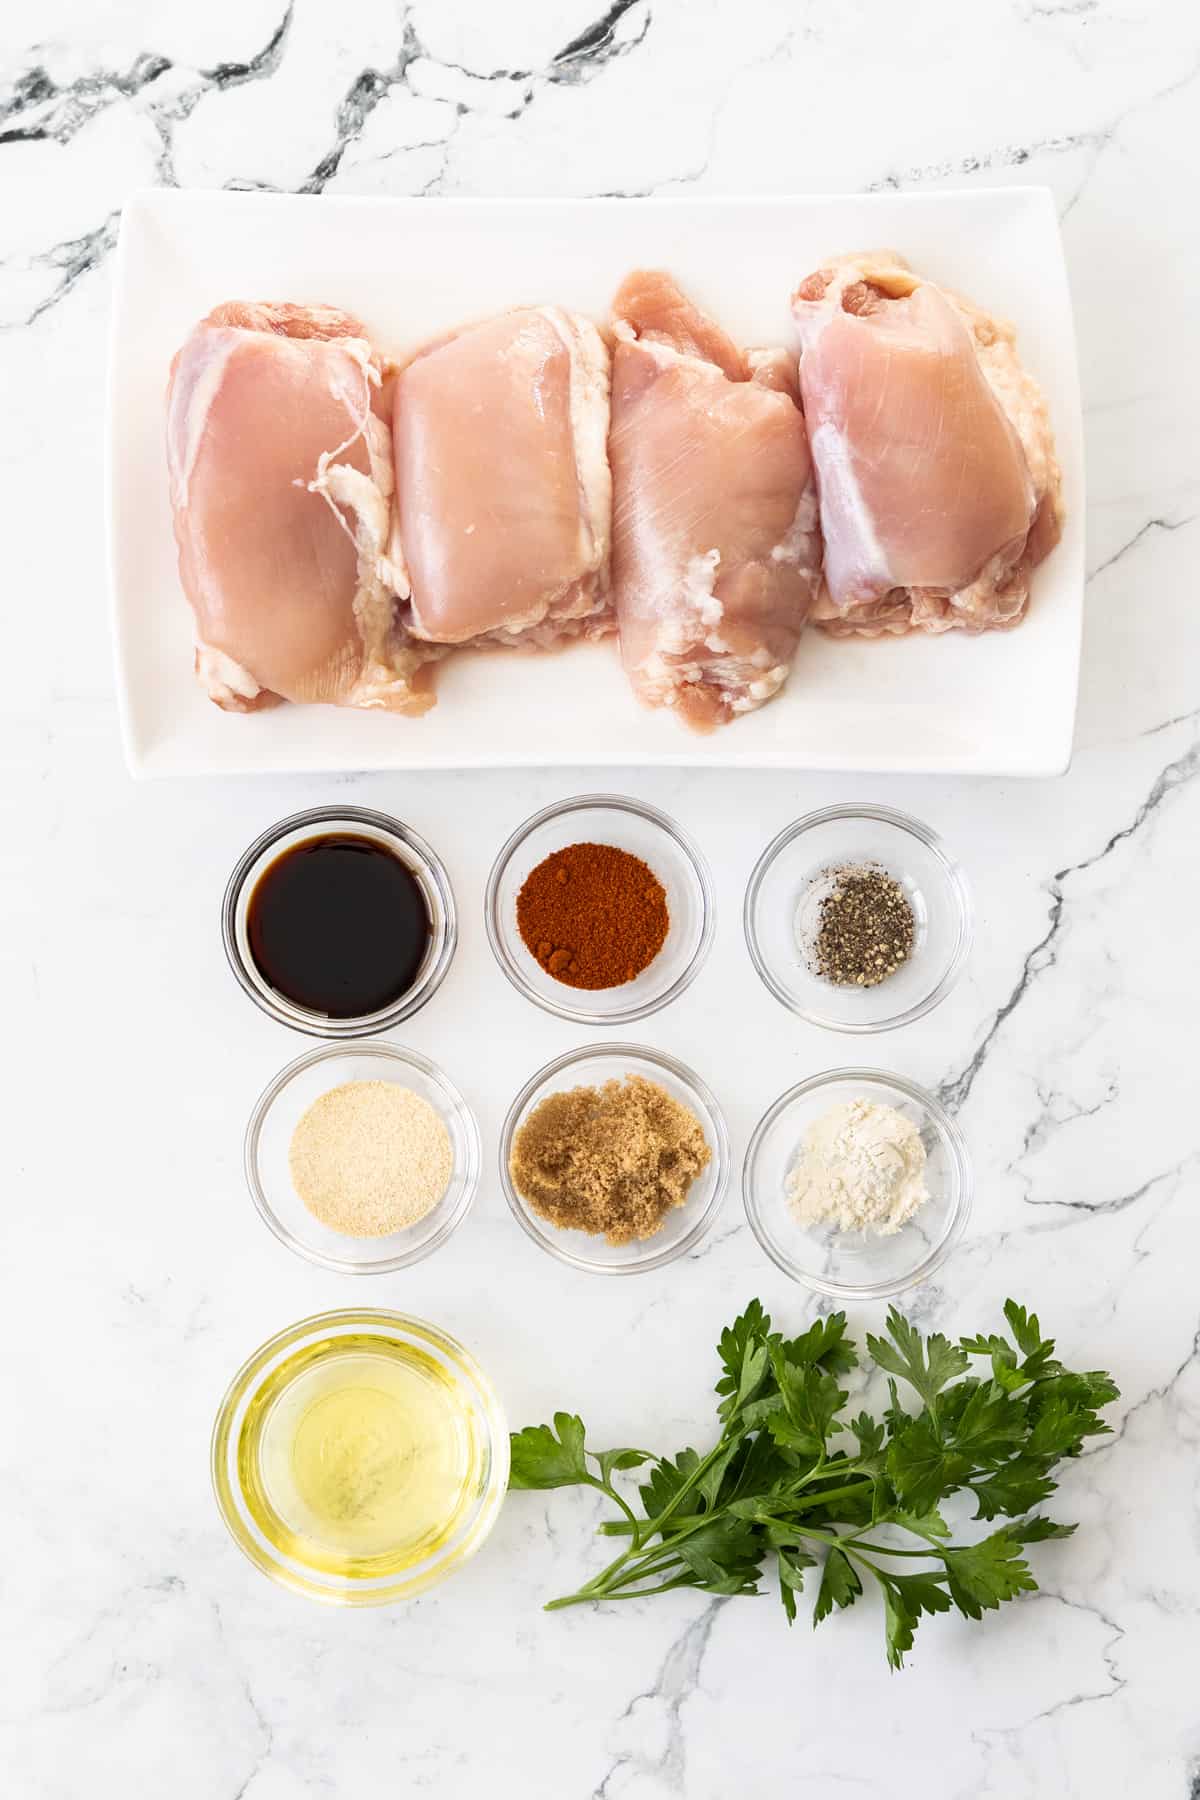 raw chicken thighs, parsley, olive oil, and spices on a marbled board.